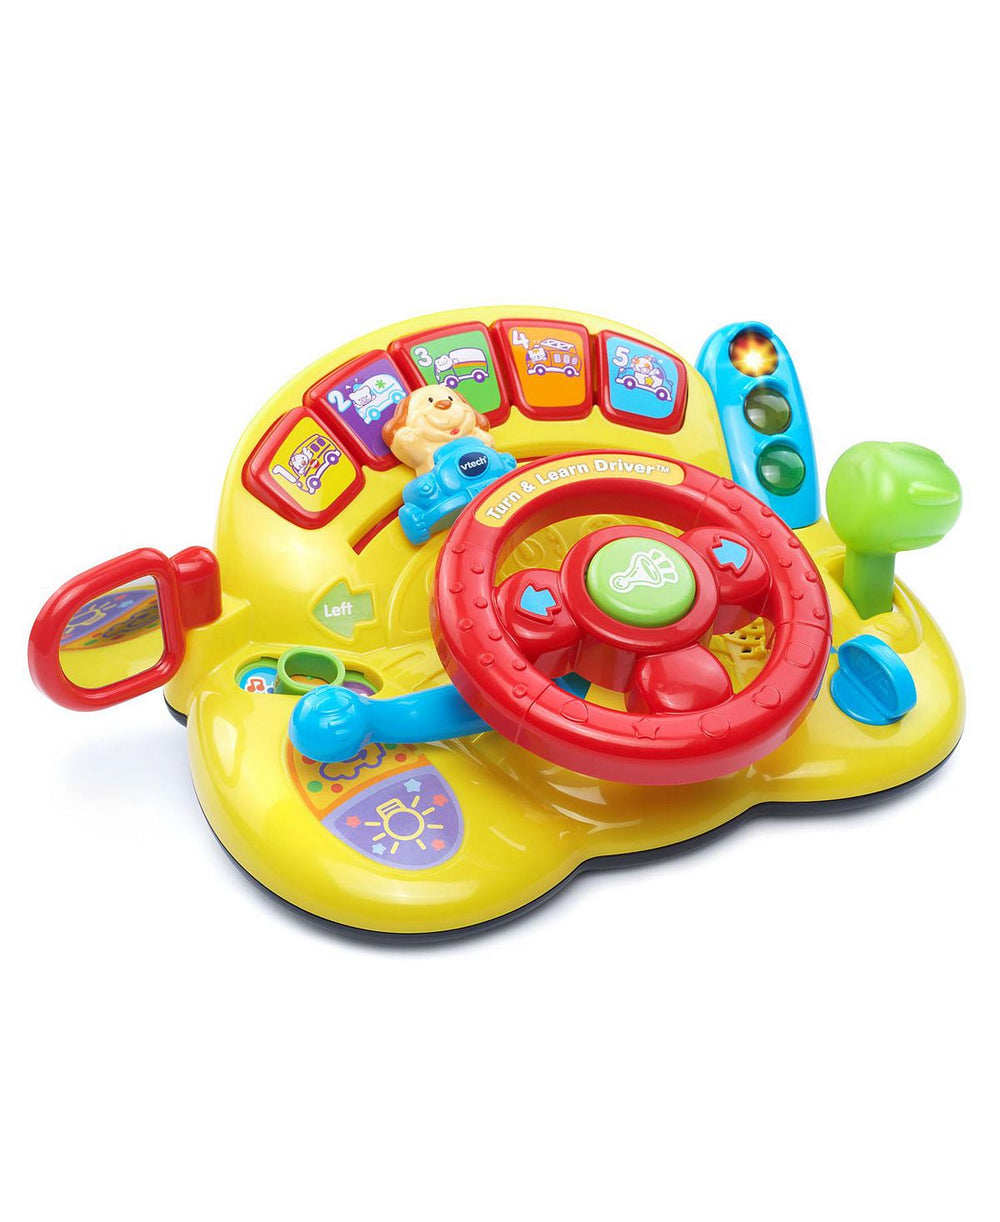 VTech Turn & Learn Driver - Interactive Educational Toy with Music and Lights